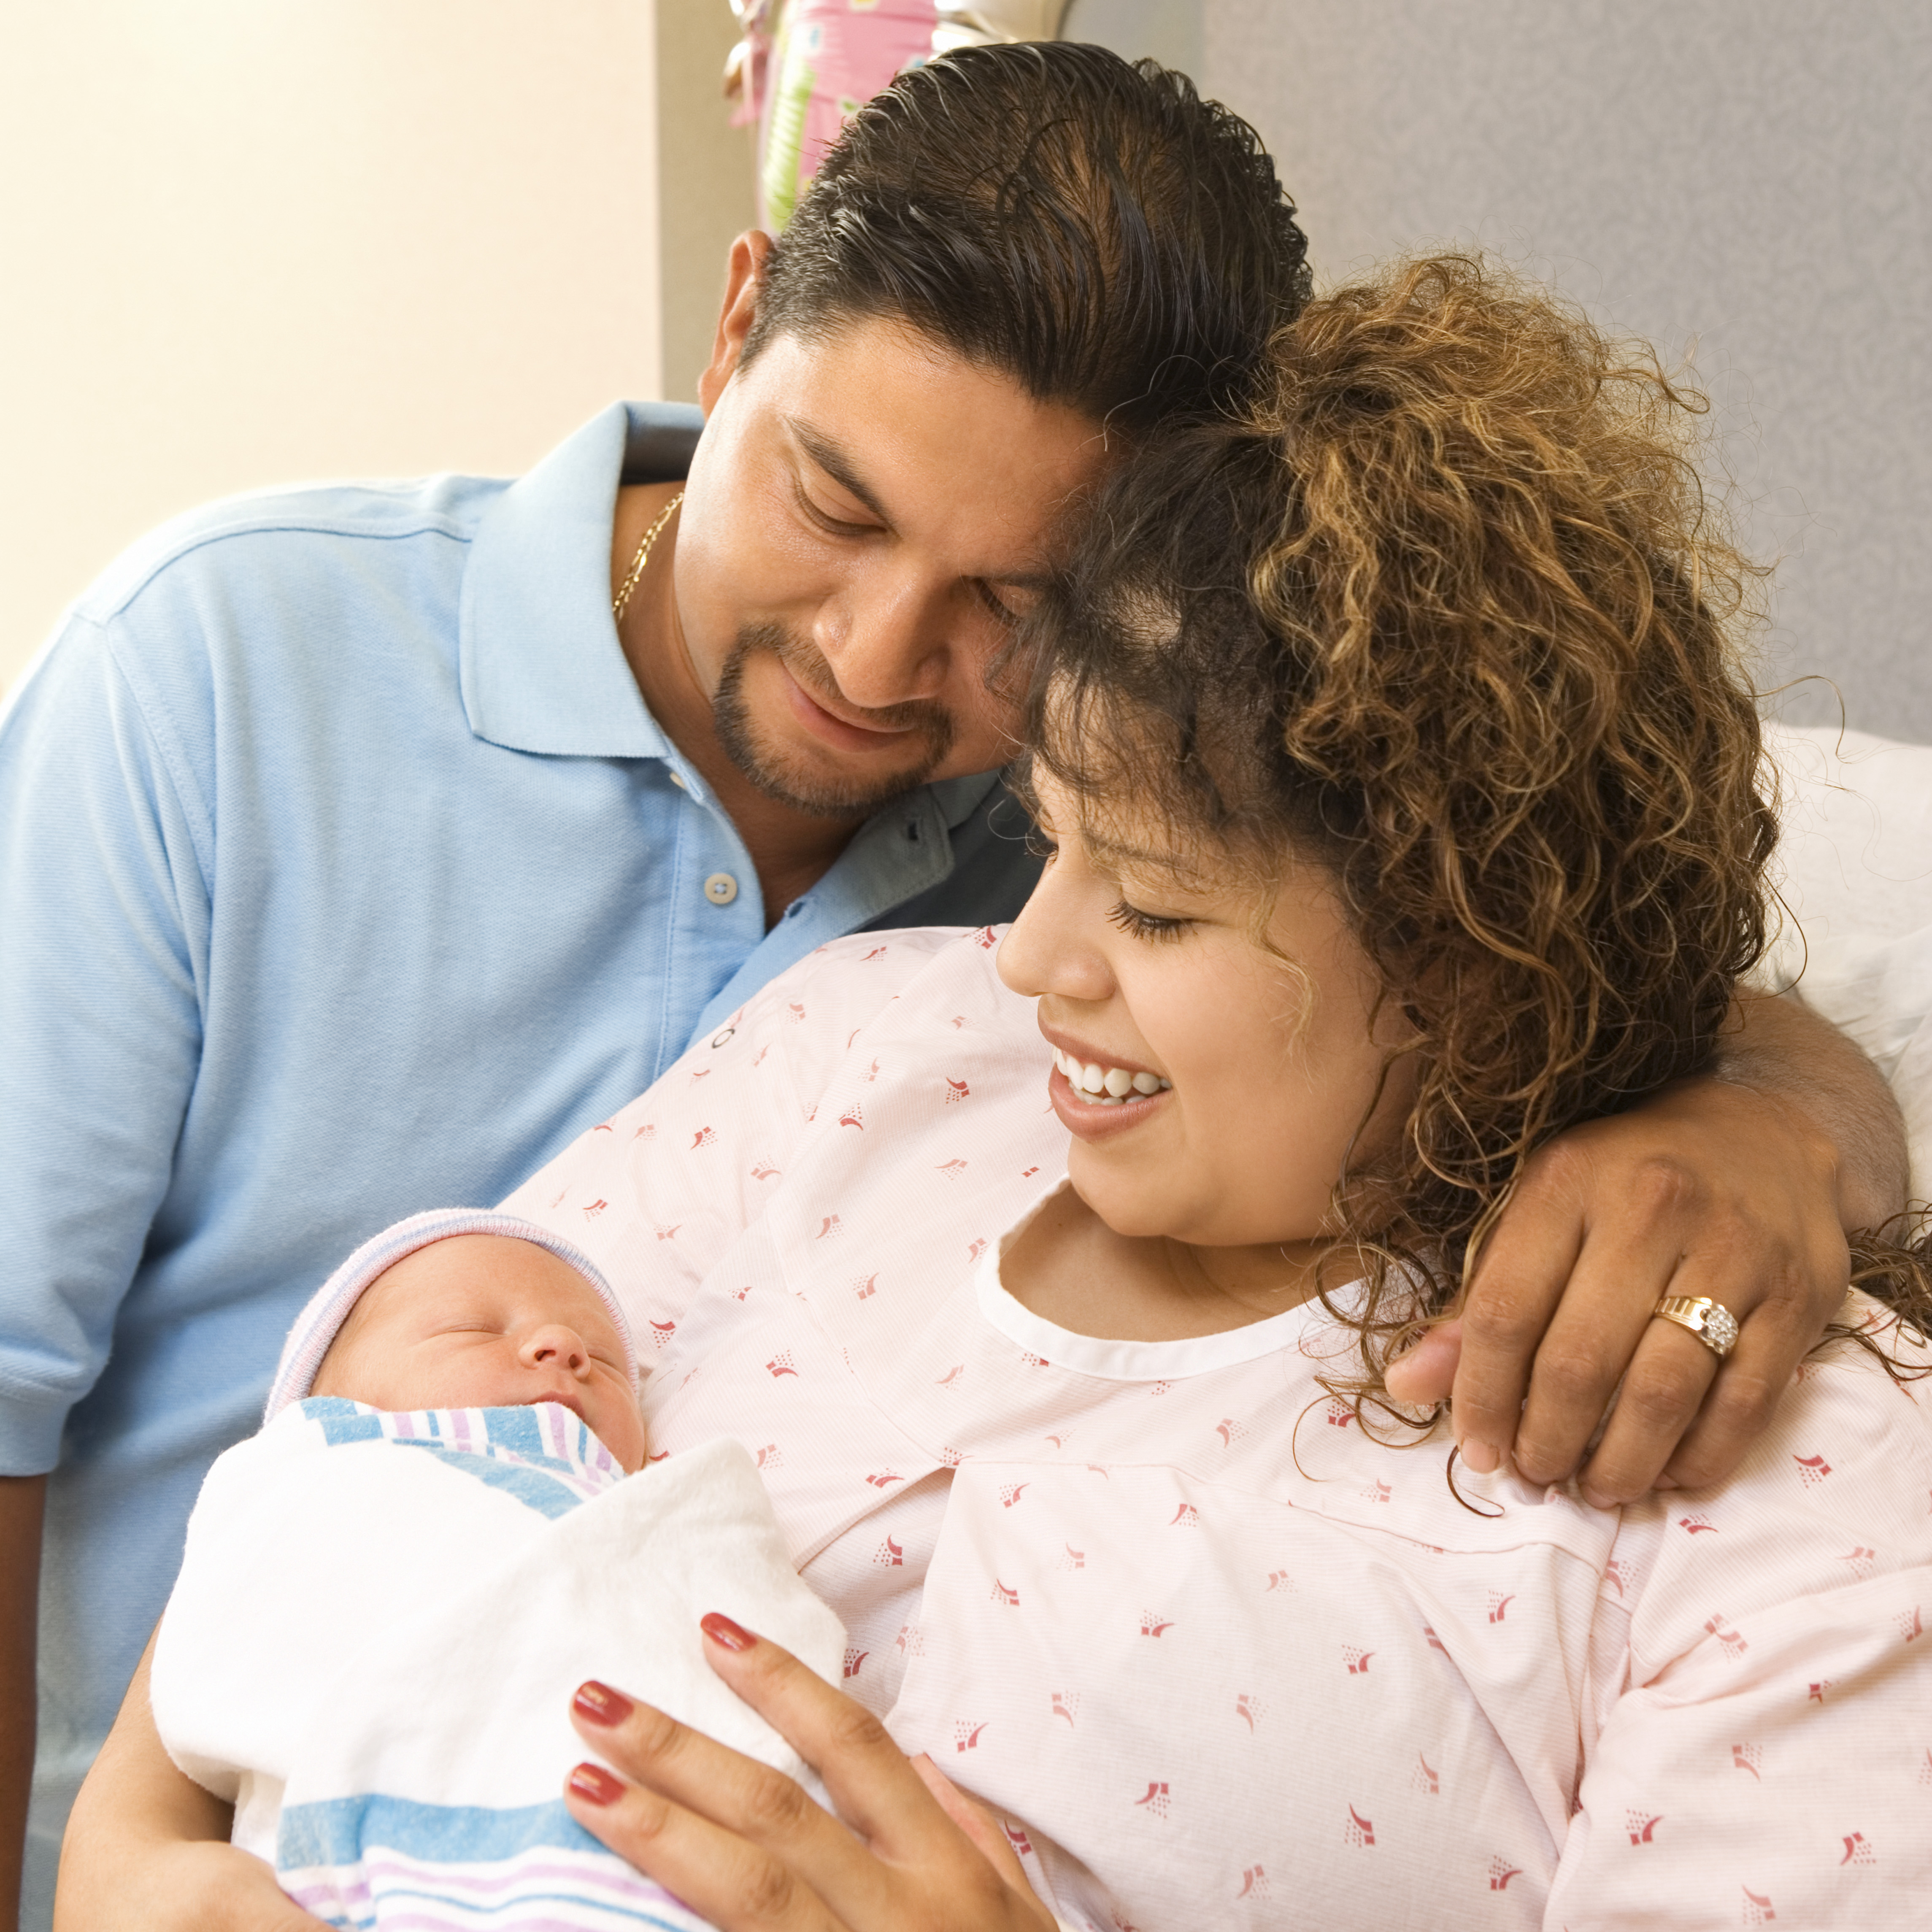 How to Add Newborn to Insurance Without SSN: Quick Guide